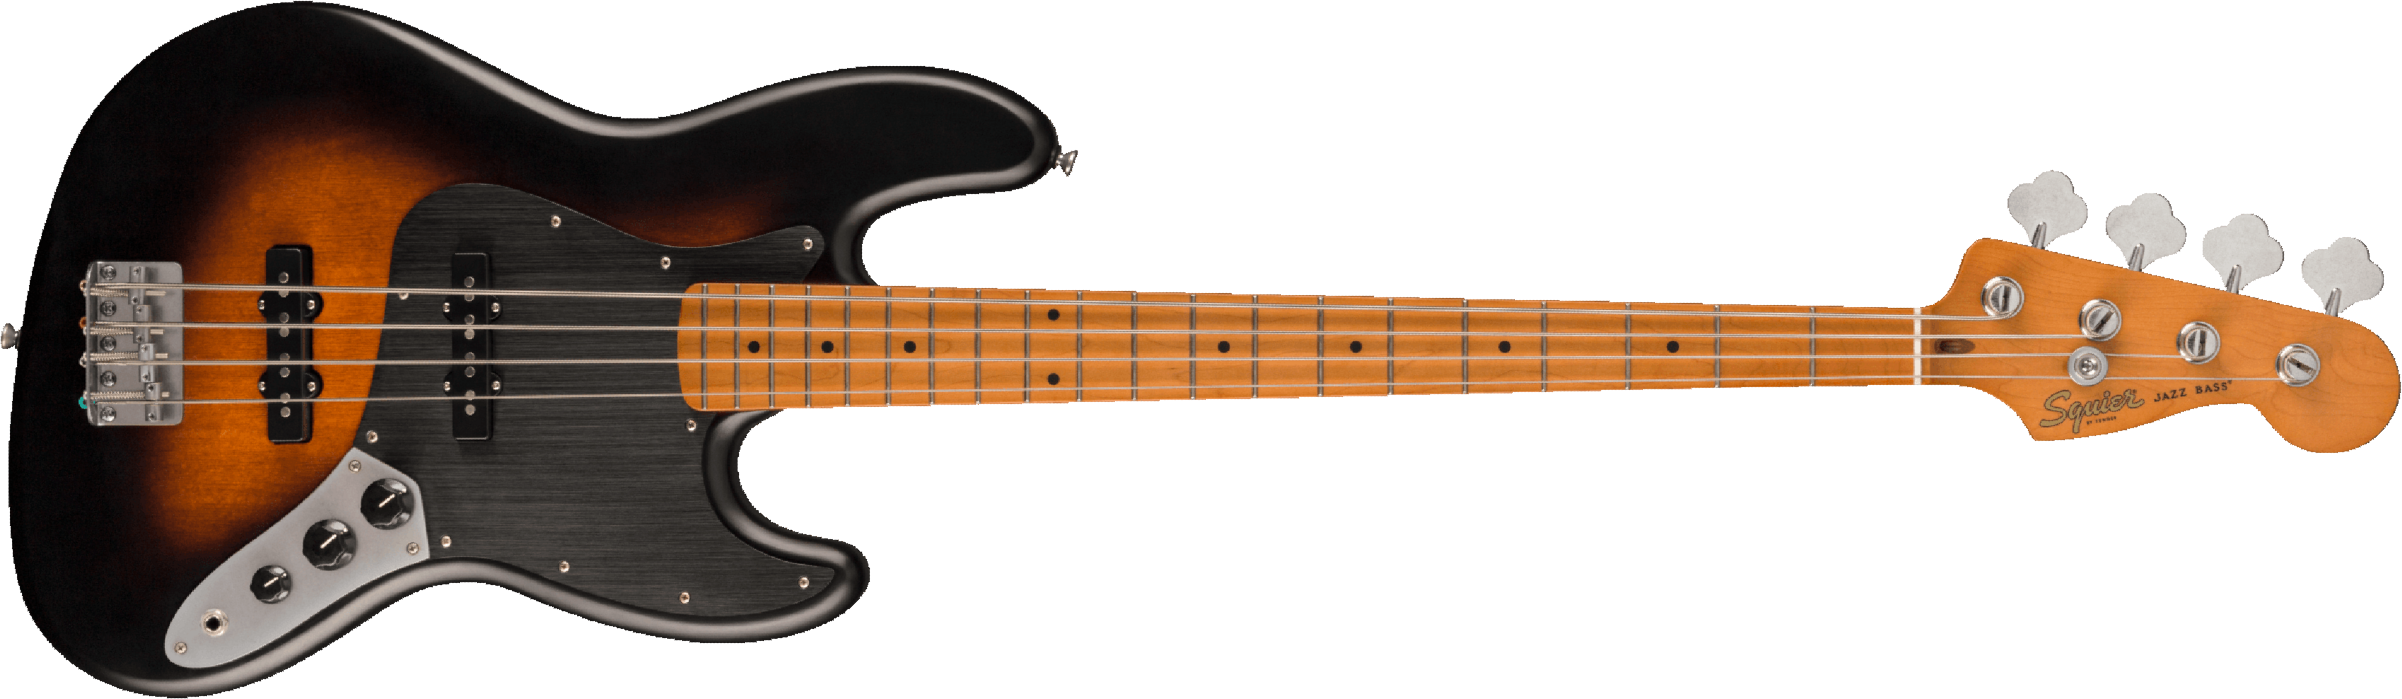 Squier Jazz Bass 40th Anniversary Gold Edition Mn - Satin Wide 2-color Sunburst - Solidbody E-bass - Main picture